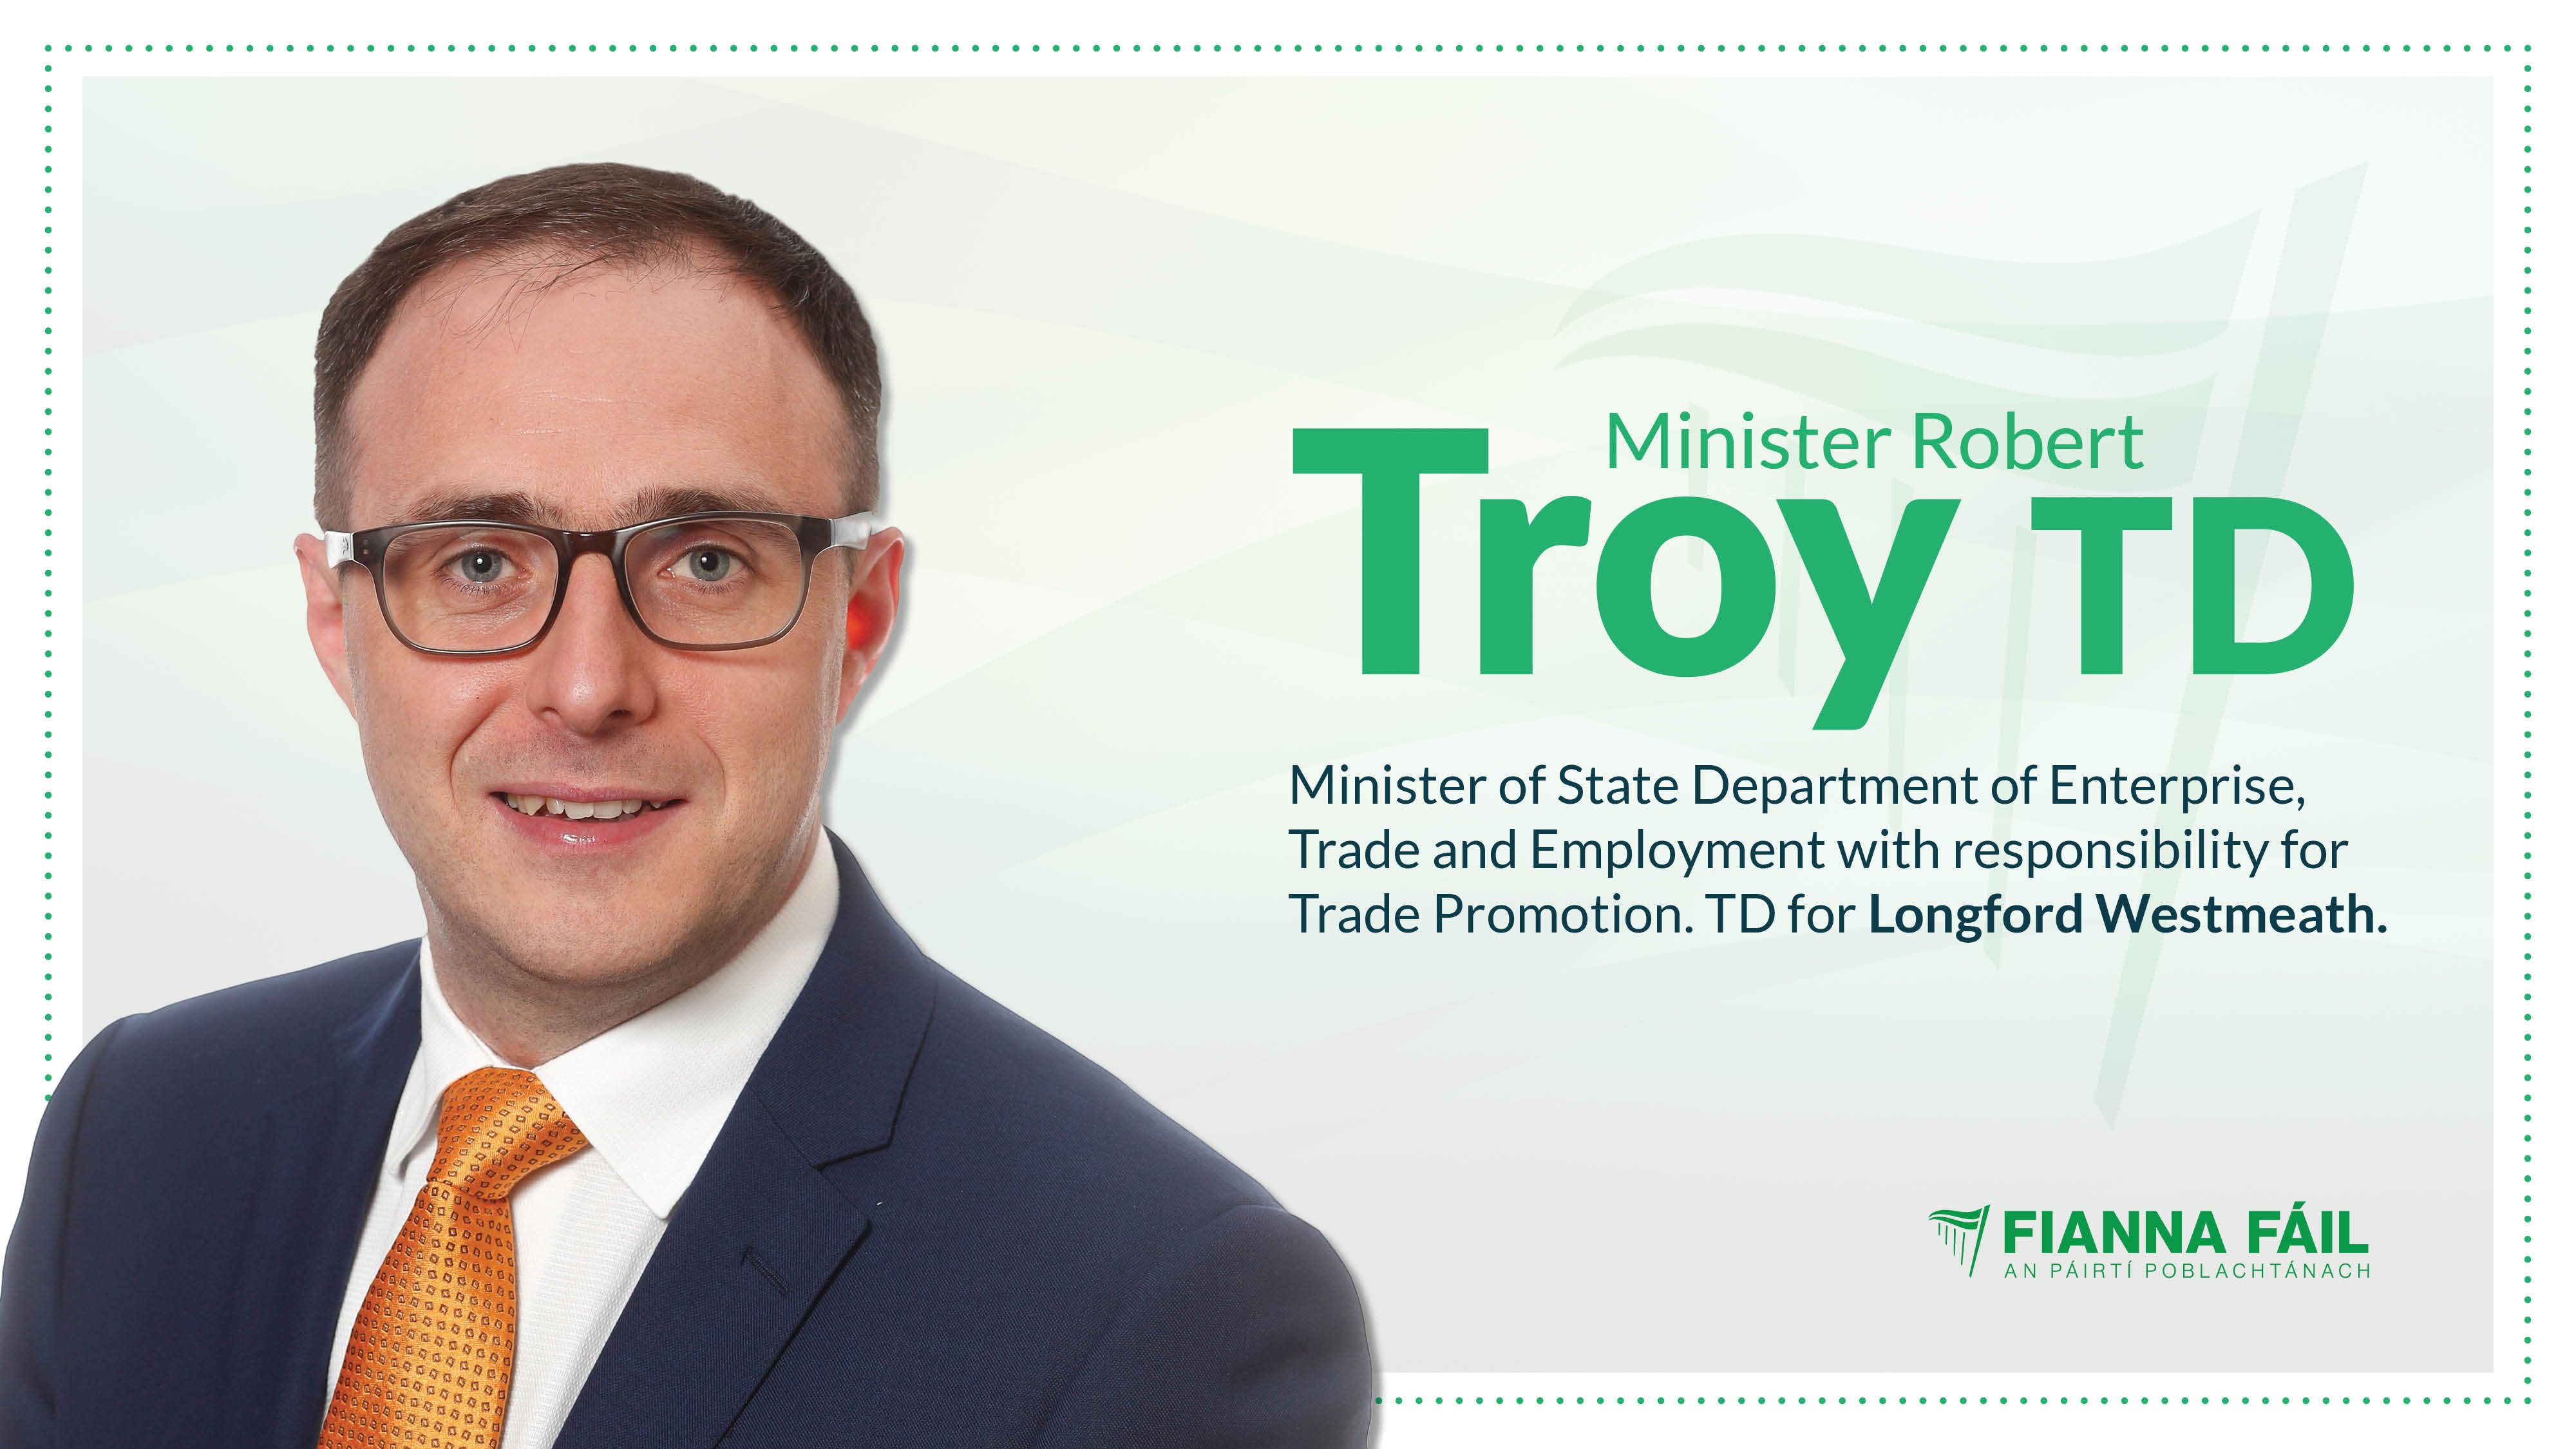 Minister Troy Welcomes Record Goods Exports of €160.8bn for 2020